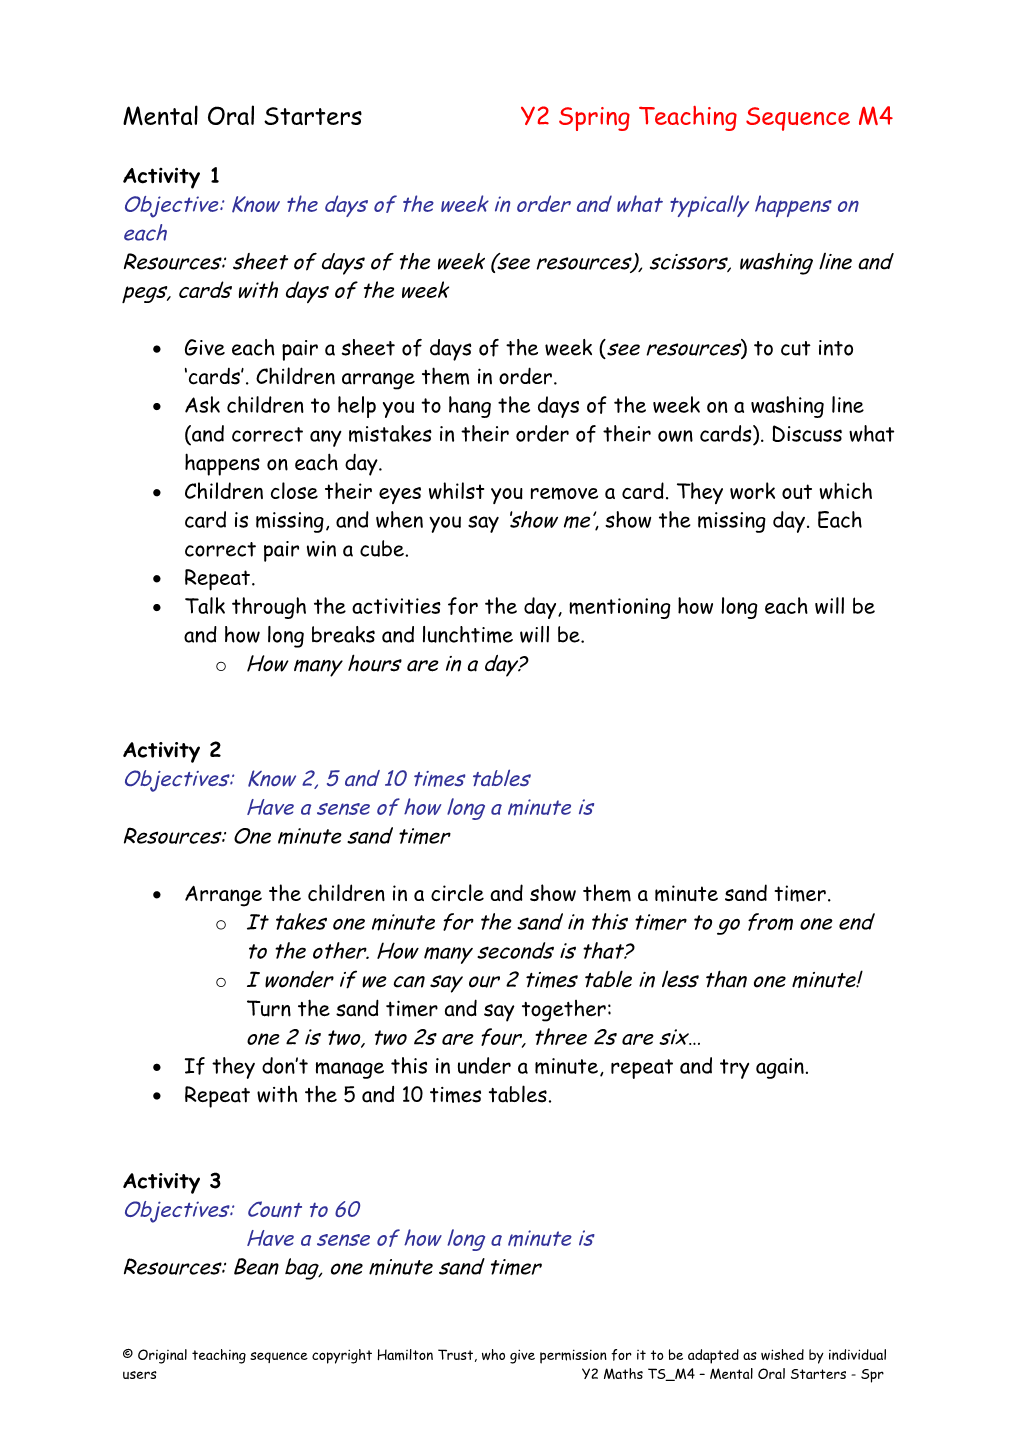 Mental Oral Starters Y2 Spring Teaching Sequence M4